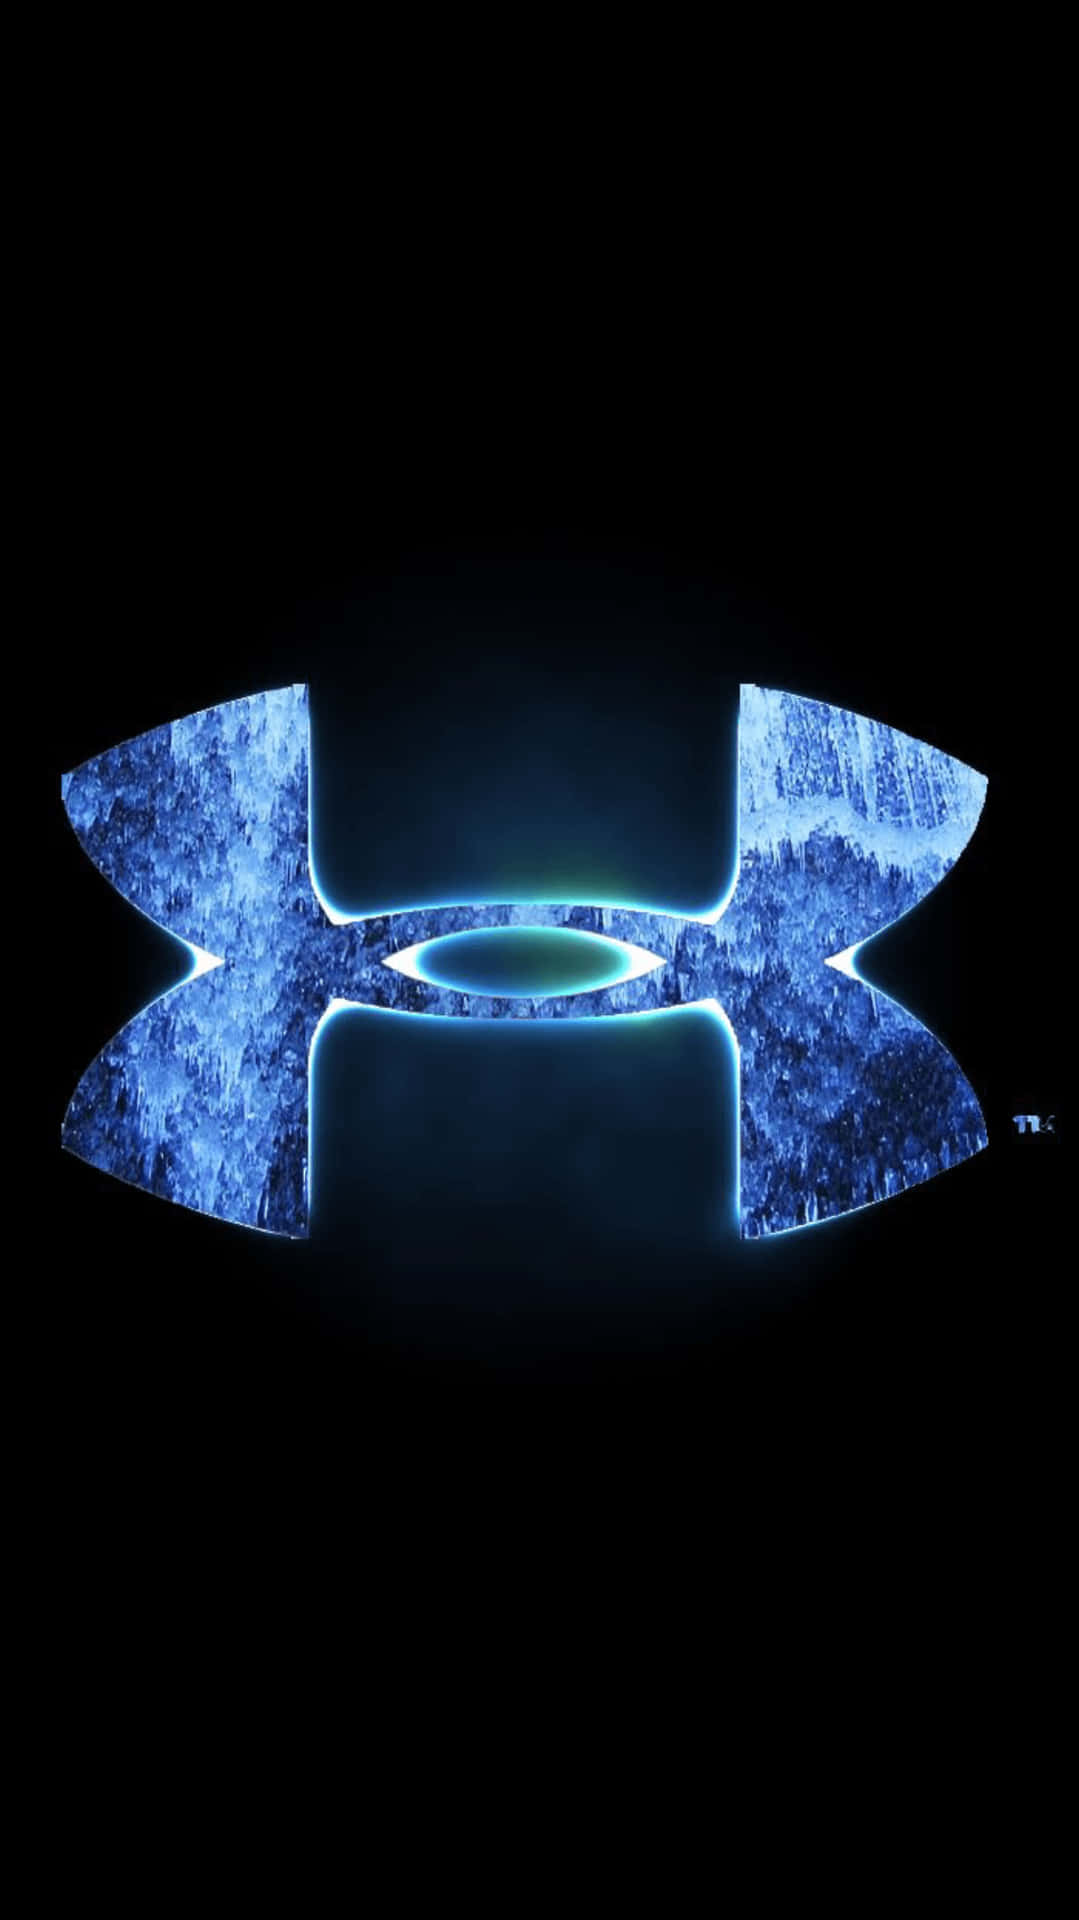 "Stand Out From The Crowd With Under Armour"